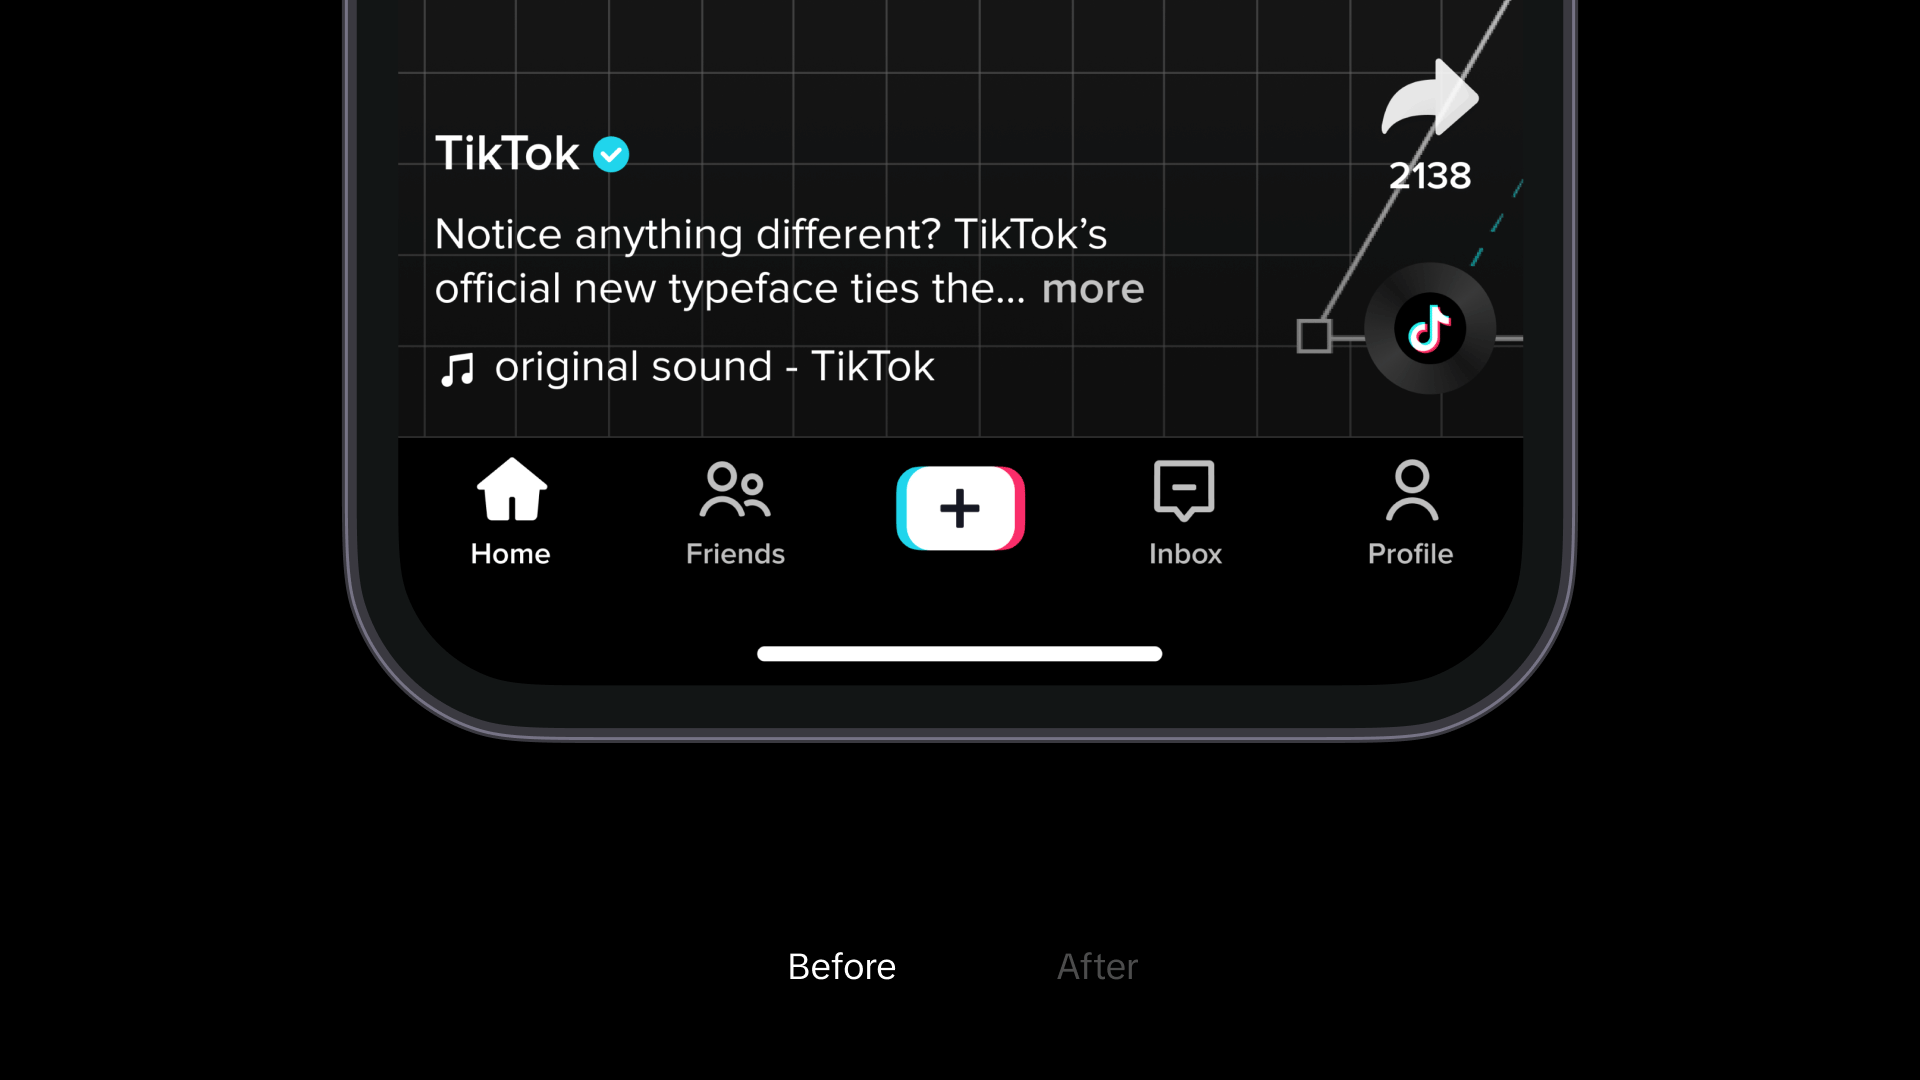 A GIF showing the differences between TikTok’s old and new fonts.